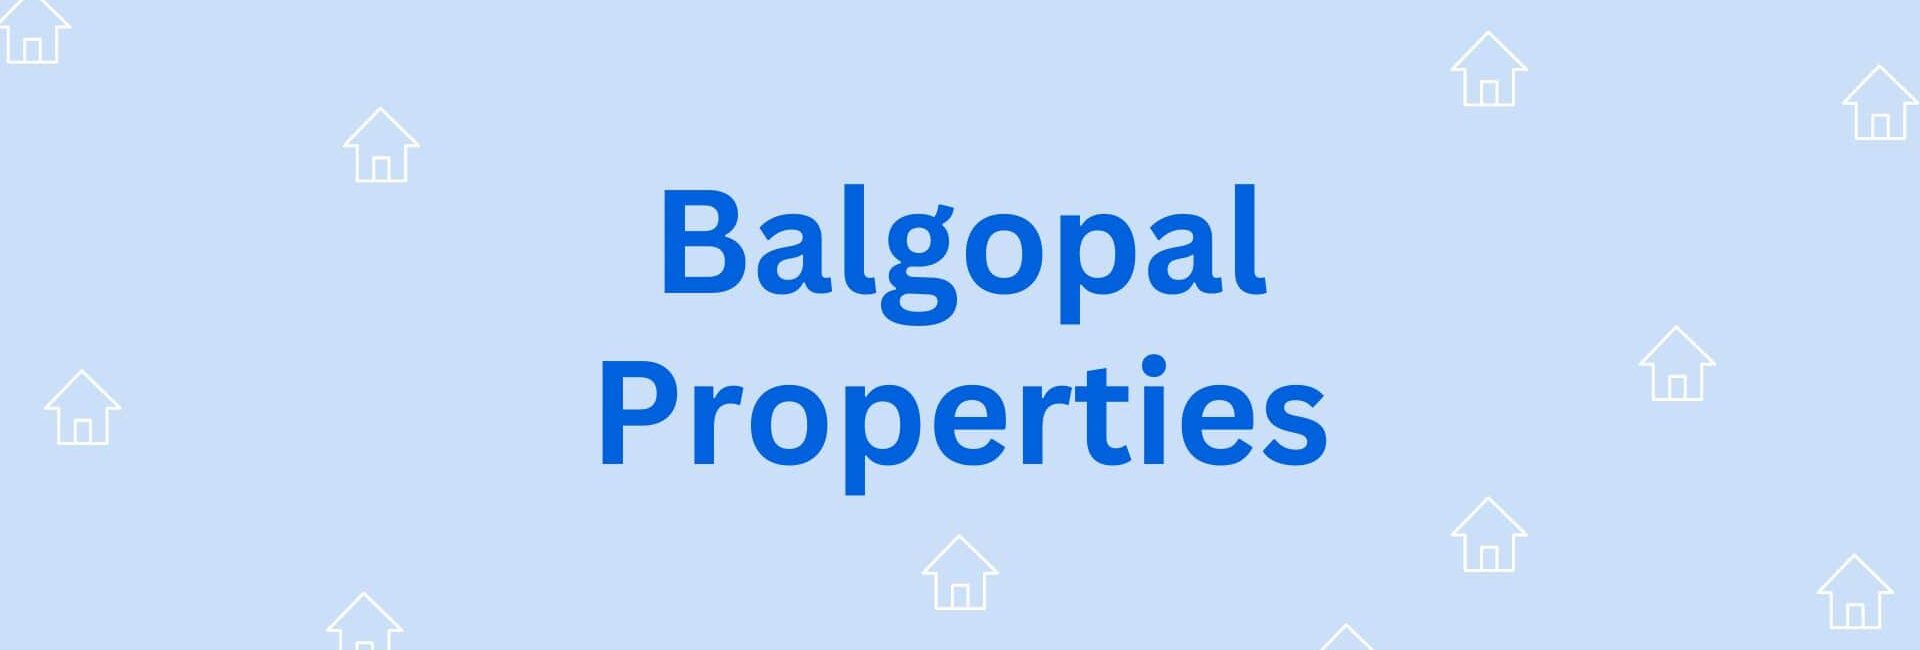 Balgopal Properties - Real Estate Agent in Hisar